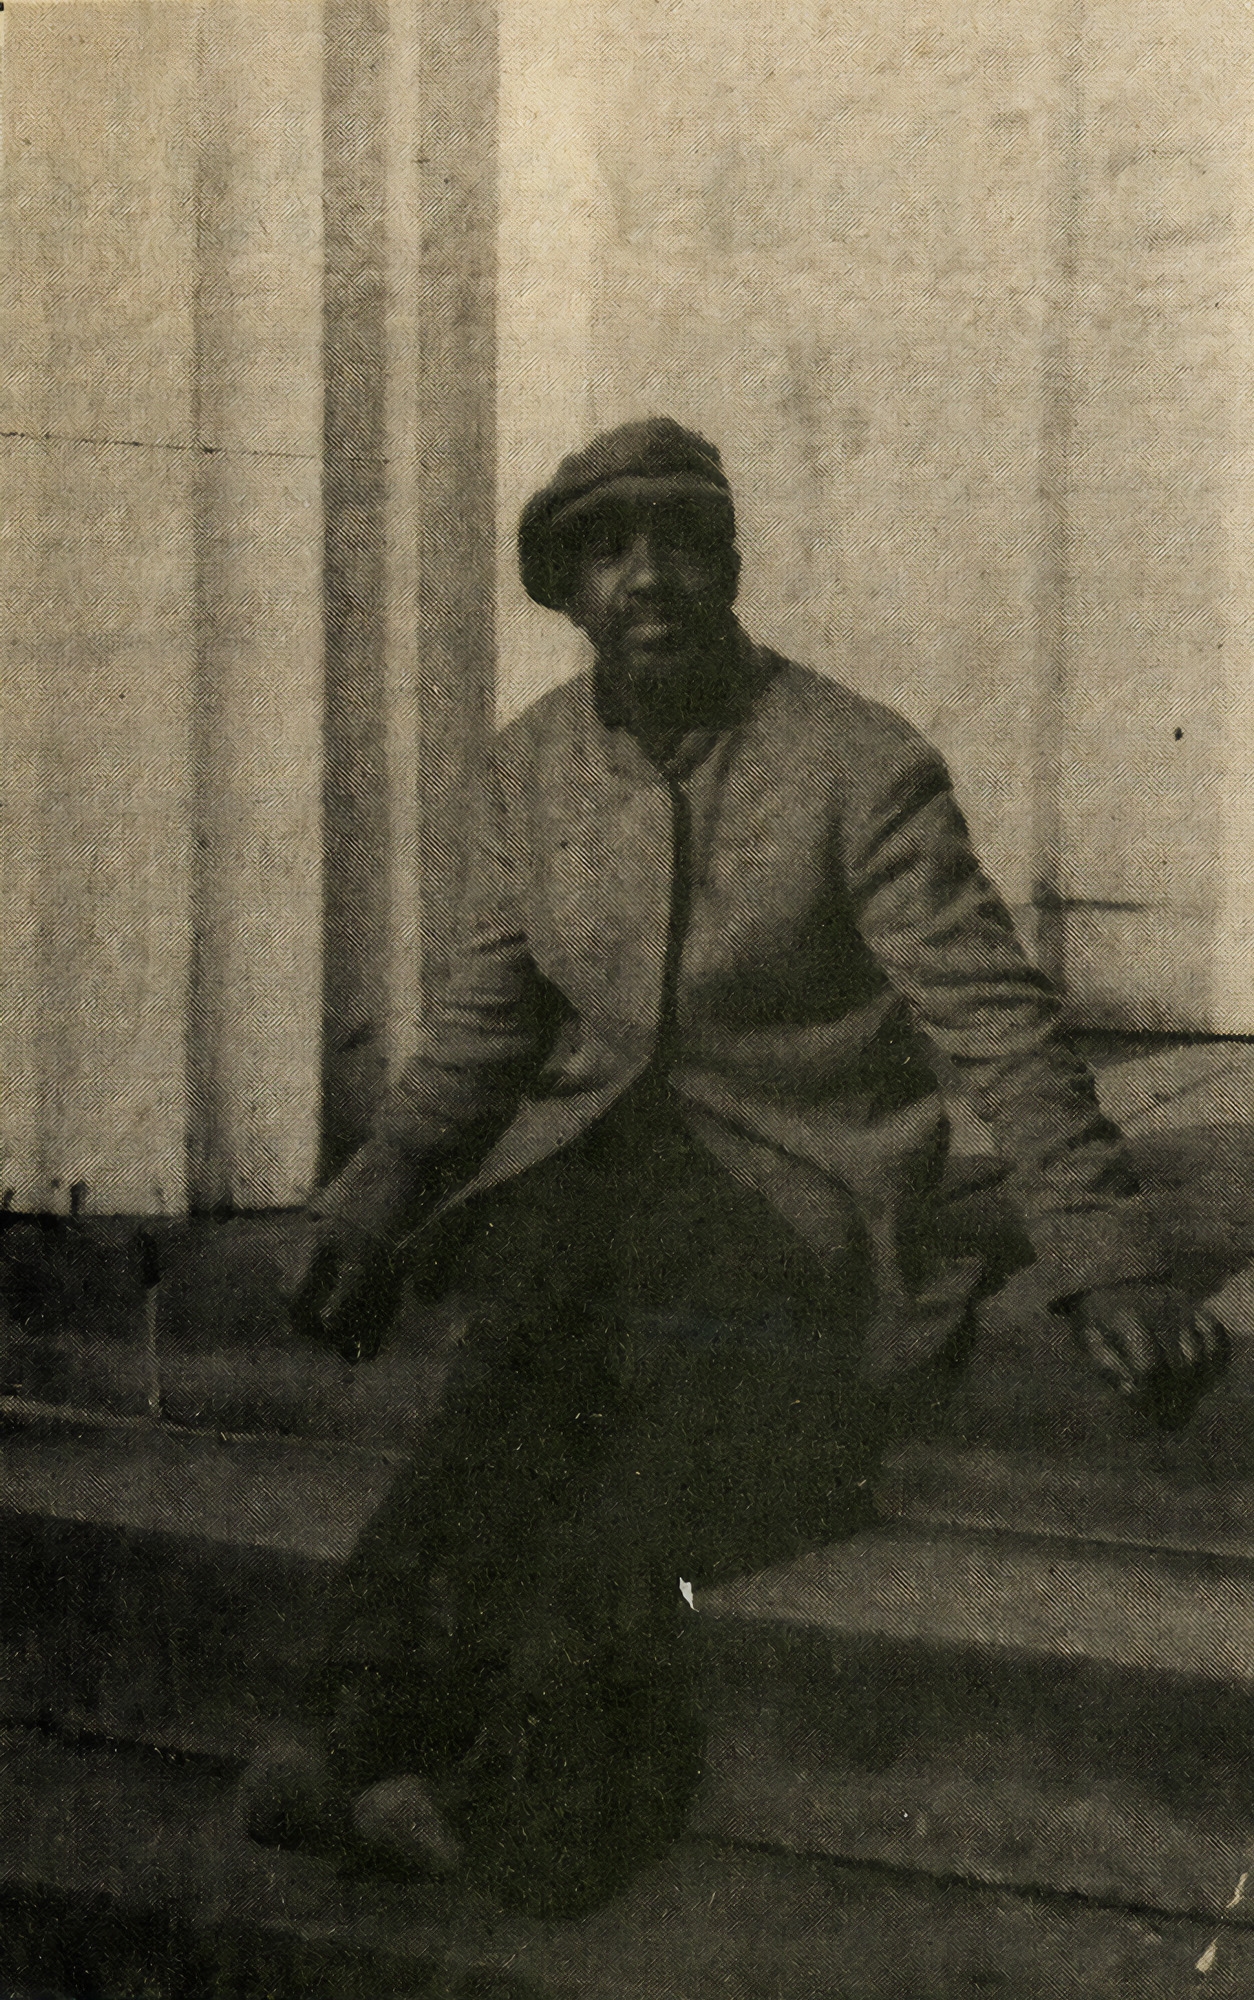 George Pine lived in West Hartford and worked odd jobs, as a jack-of-all-trades. In this undated photograph, he rests on steps in the center of town.